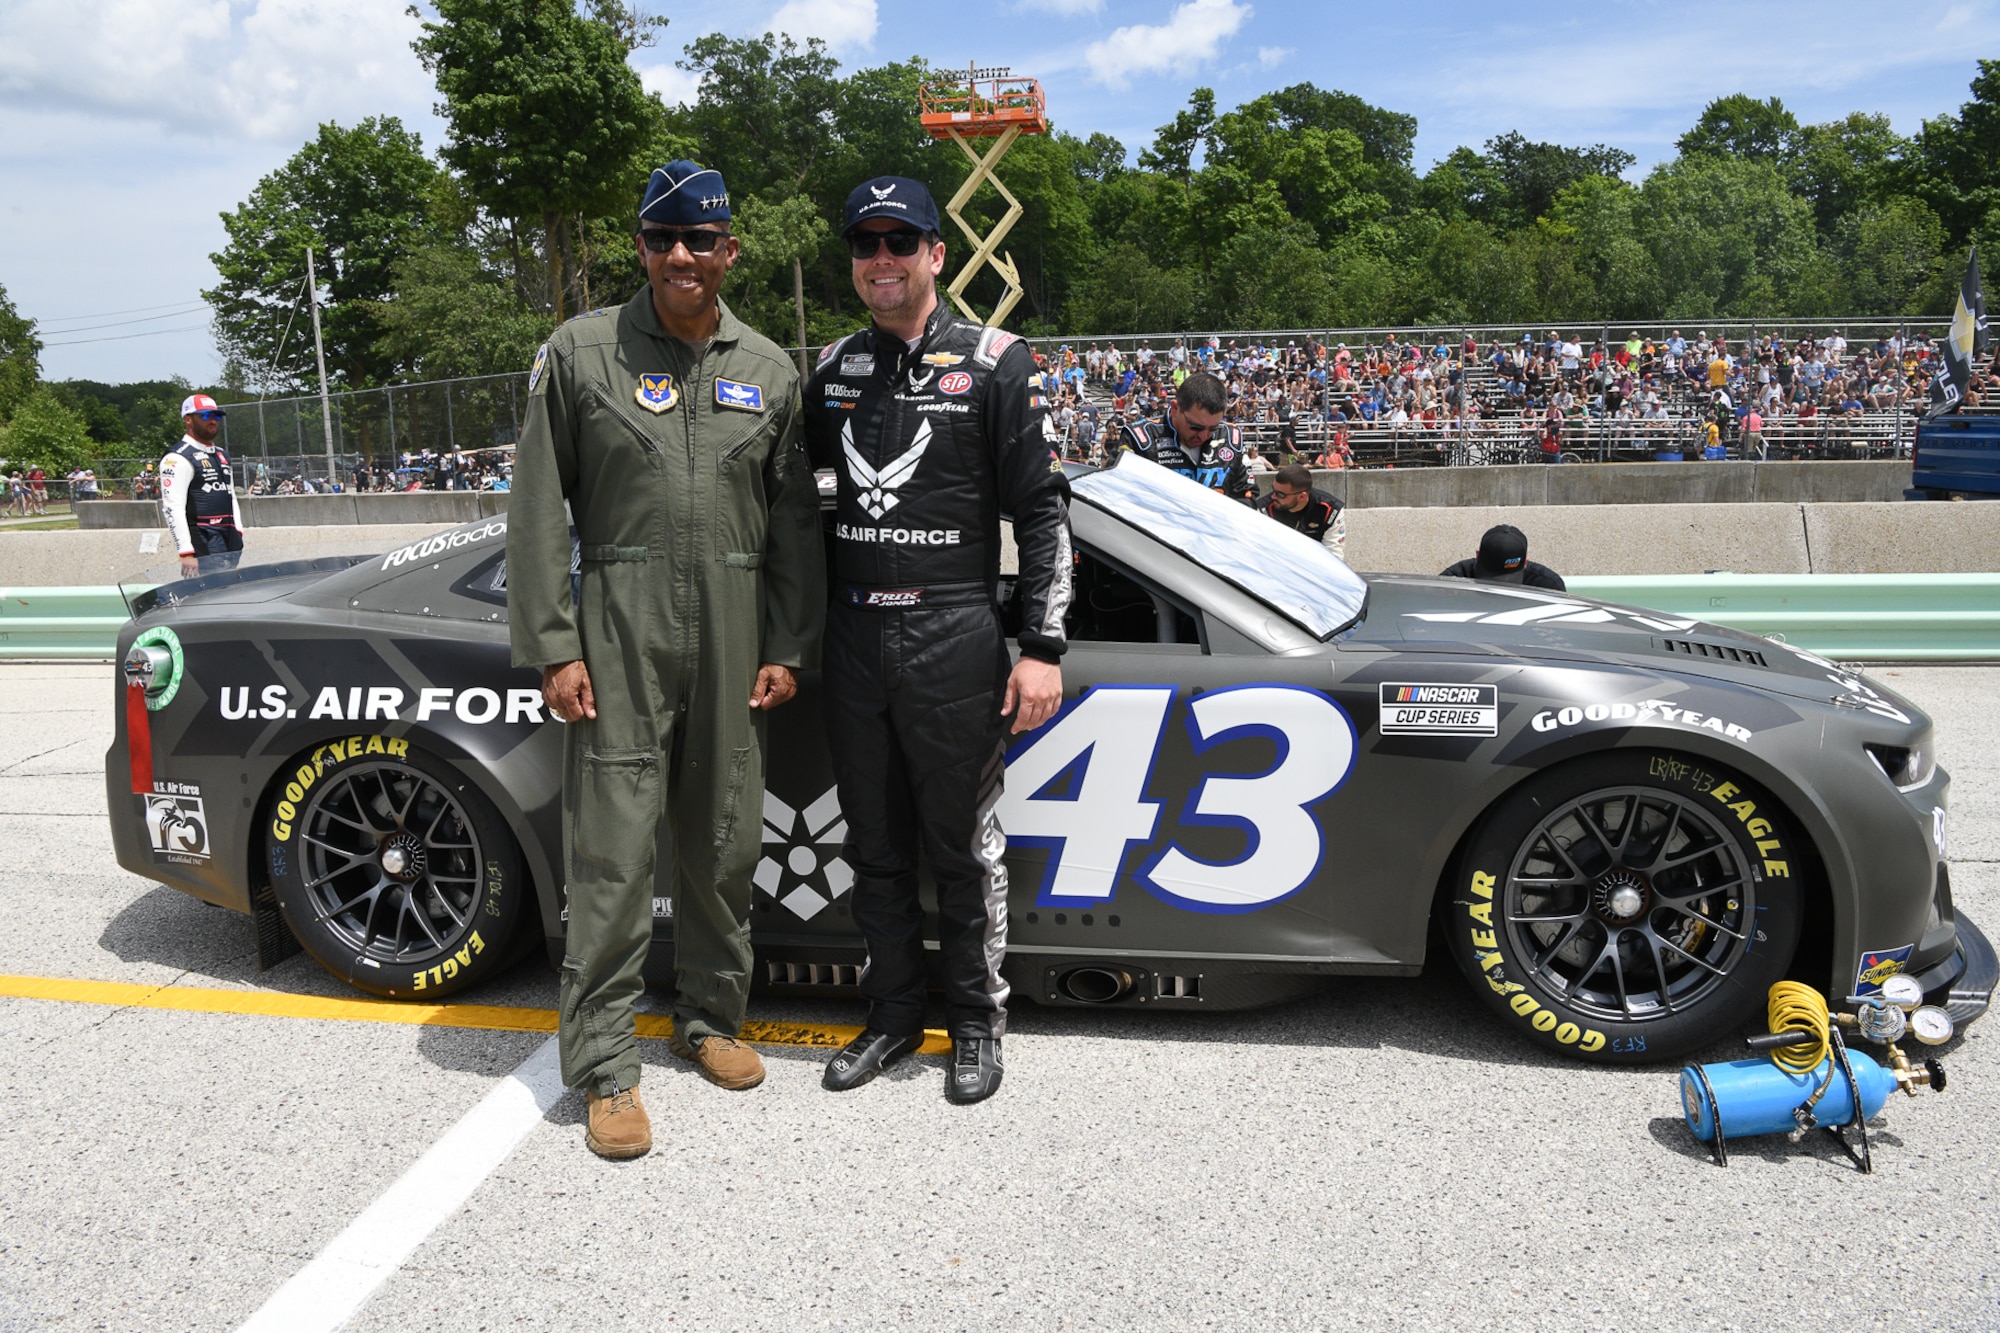 Air Force Chief of Staff Gen. CQ Brown, Jr., (left) posed for a photo in front of the Air Force-sponsored Chevrolet Camaro with driver Erik Jones of Petty GMS Motorsports near the Kwik Trip 250 NASCAR Cup Series finish line on the Road America course near Elkhart Lake, Wisconsin, July 3, 2022.